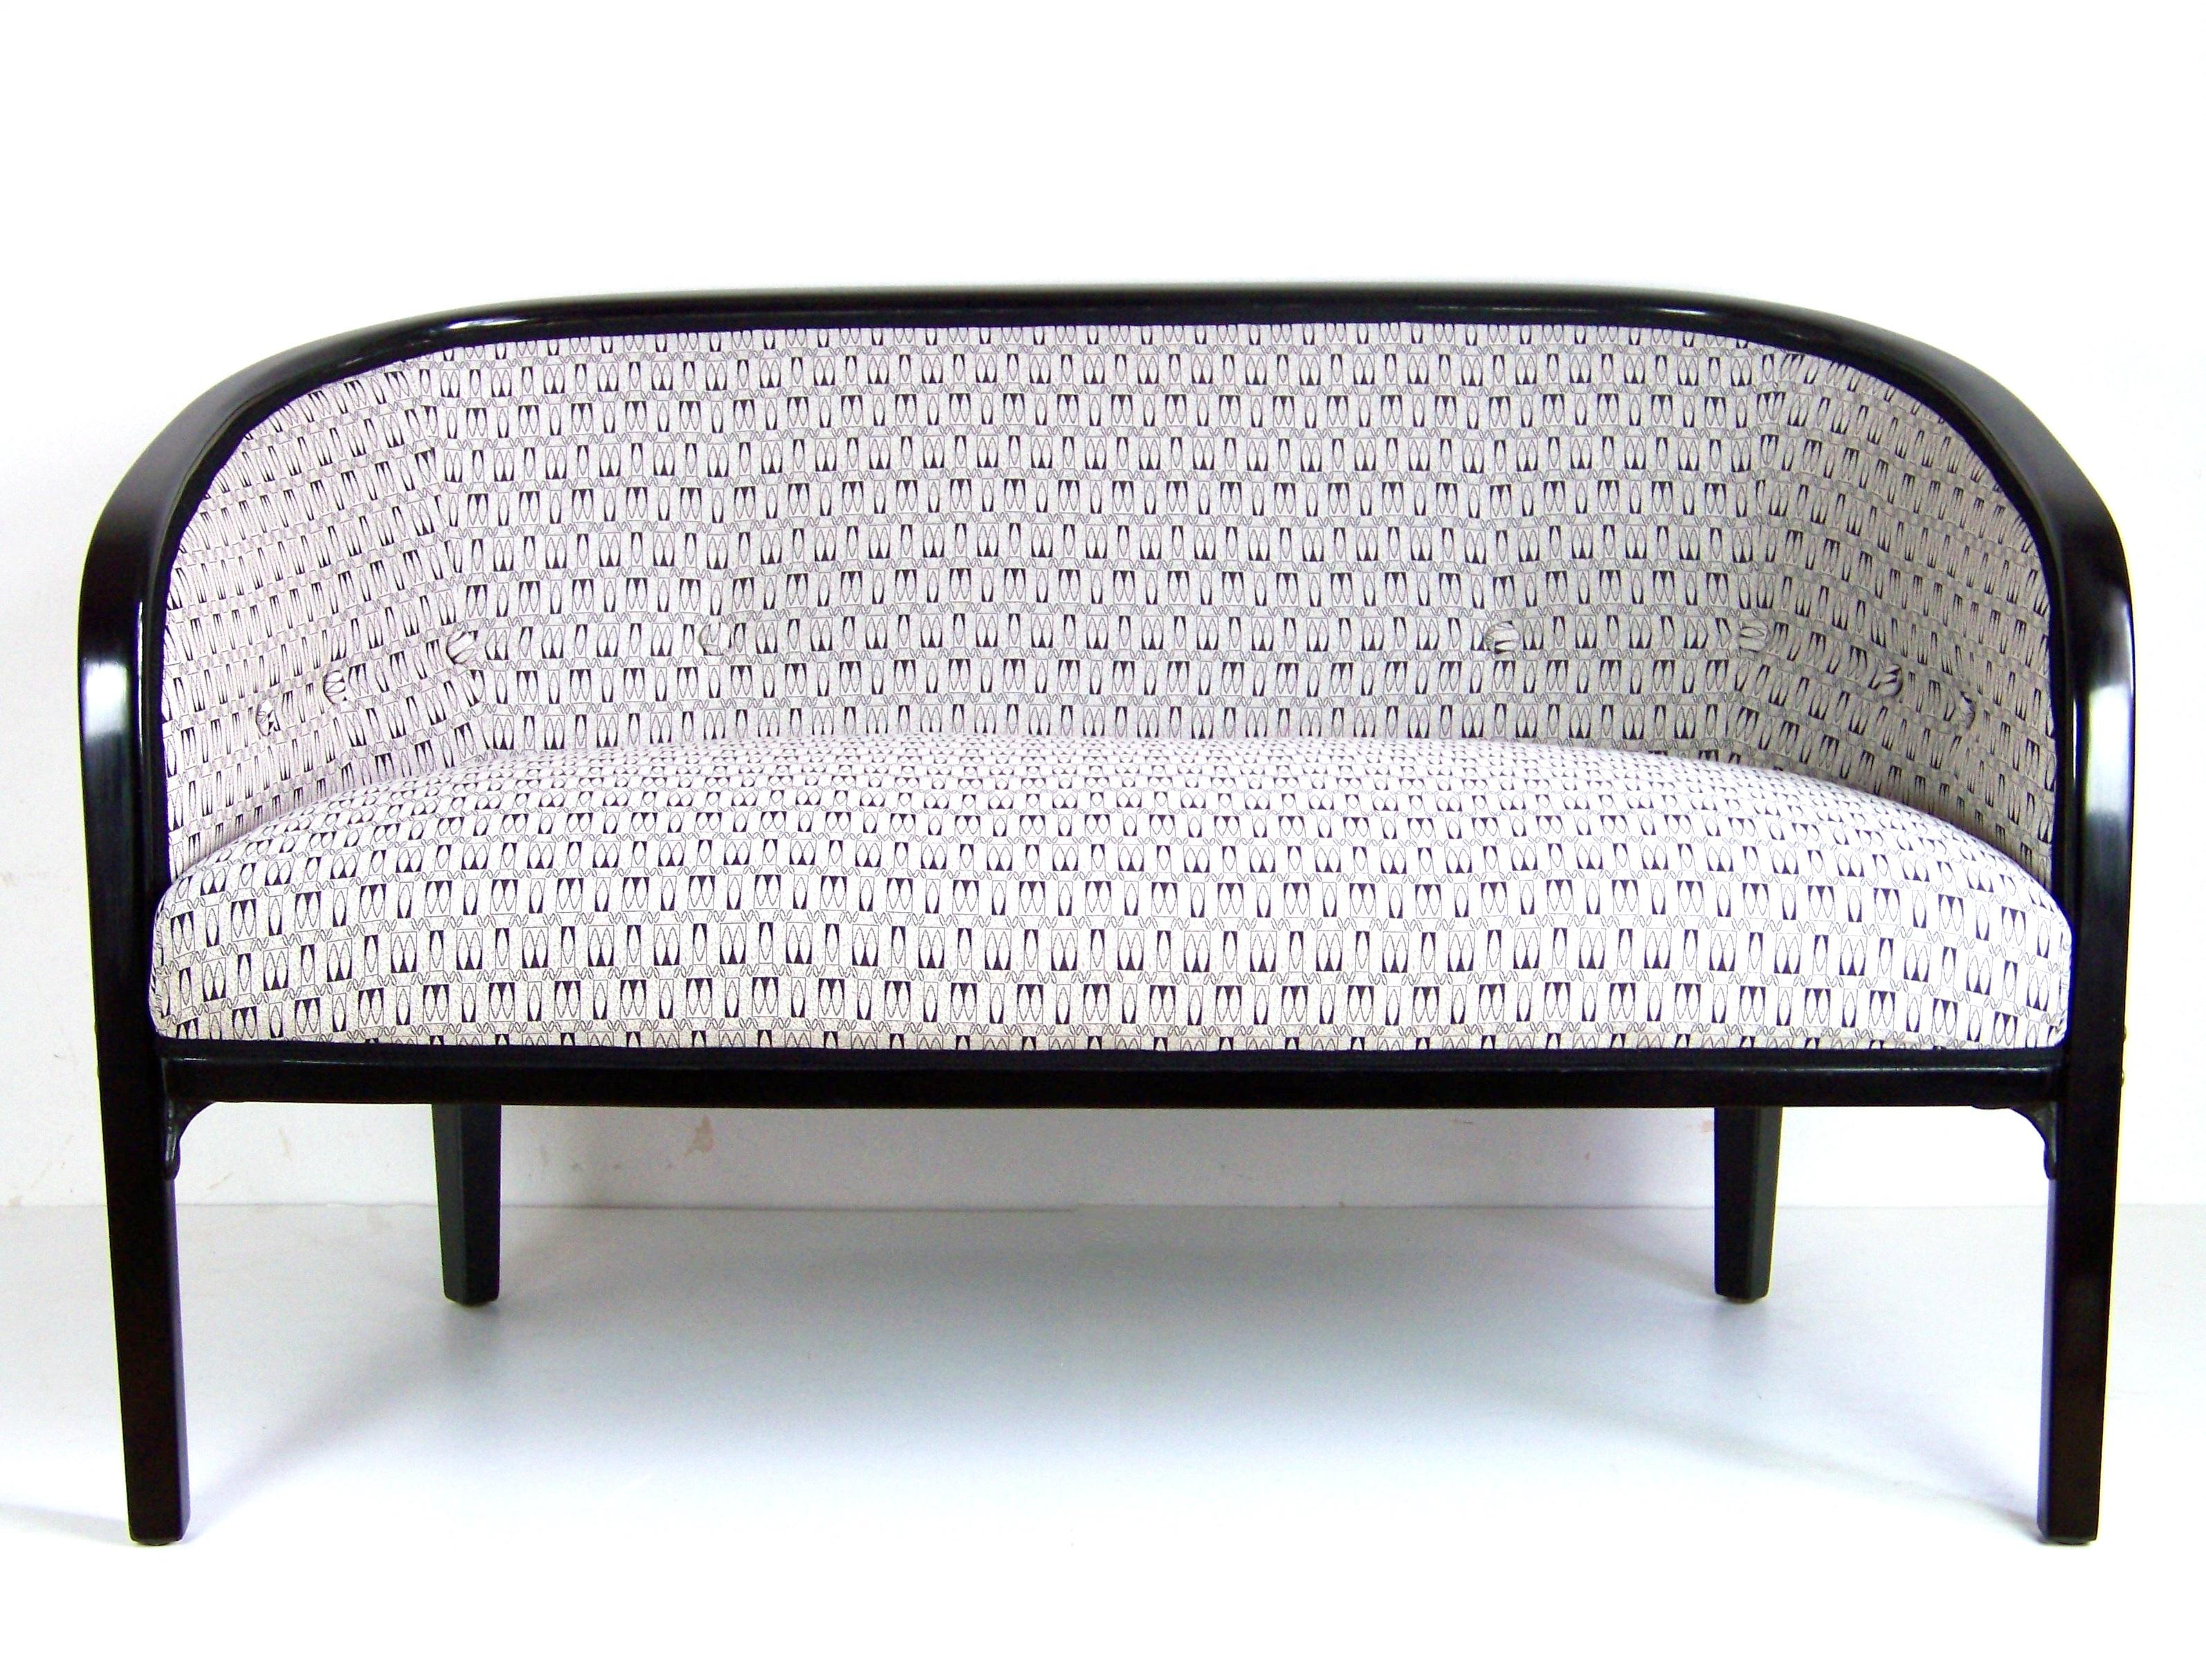 Manufactured in company Jacob & Josef Kohn. Newly restored. Easier version of Nr.720 designed by Josef Hoffmann. Used textiles also design by Josef Hoffmann. In the production program was included in circa 1916.